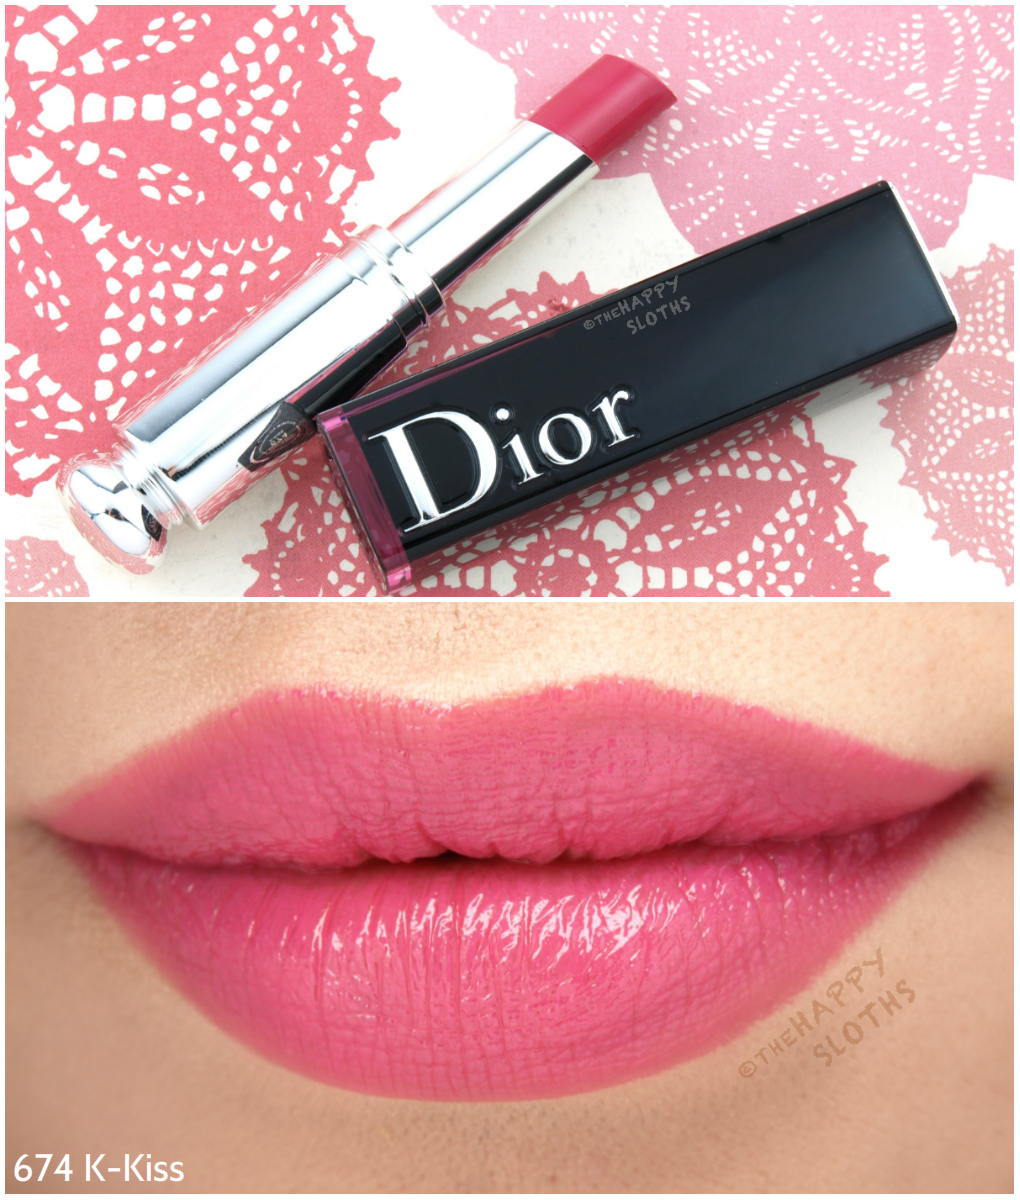 Dior Addict Lacquer Stick "674 K-Kiss": Review and Swatches